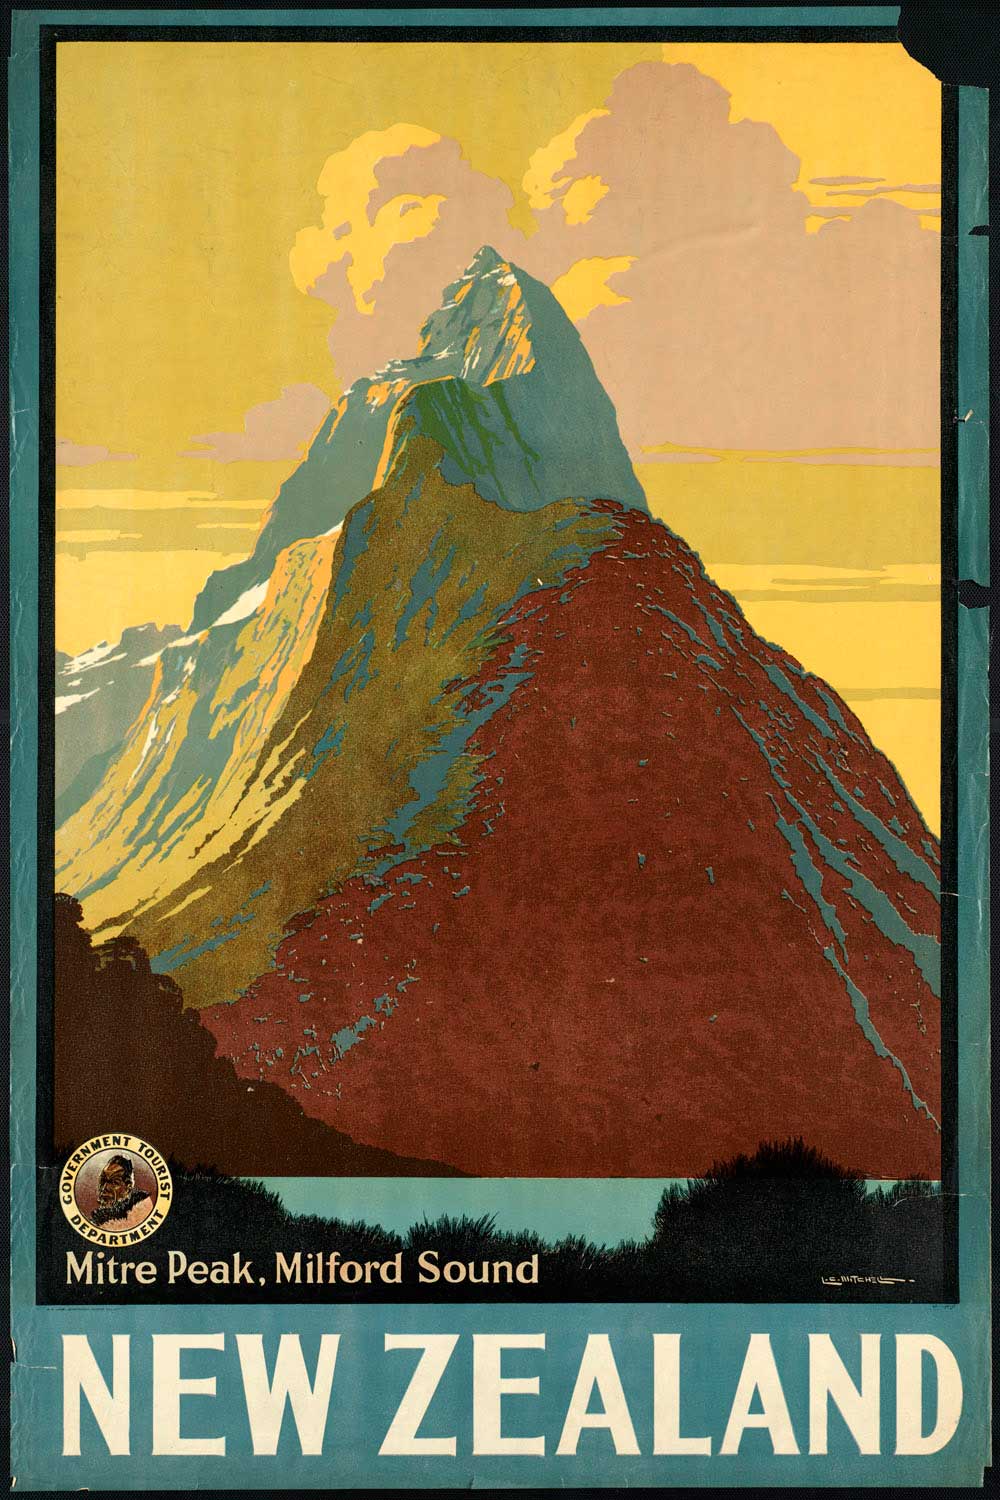 1940s travel posters